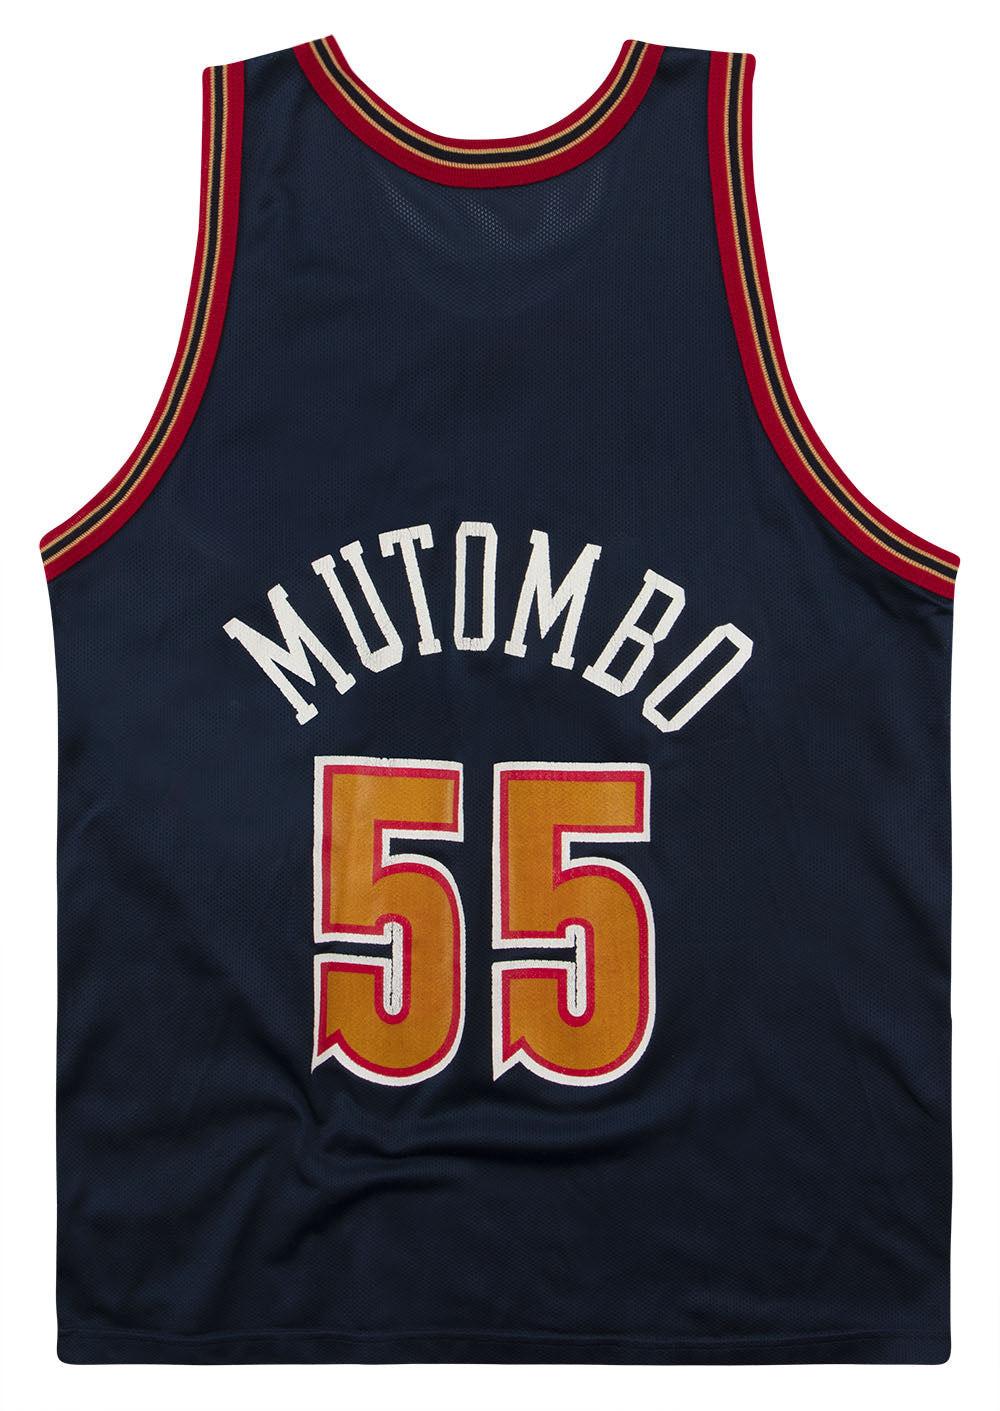 1993-95 DENVER NUGGETS MUTOMBO #55 CHAMPION JERSEY (AWAY) L - Classic  American Sports